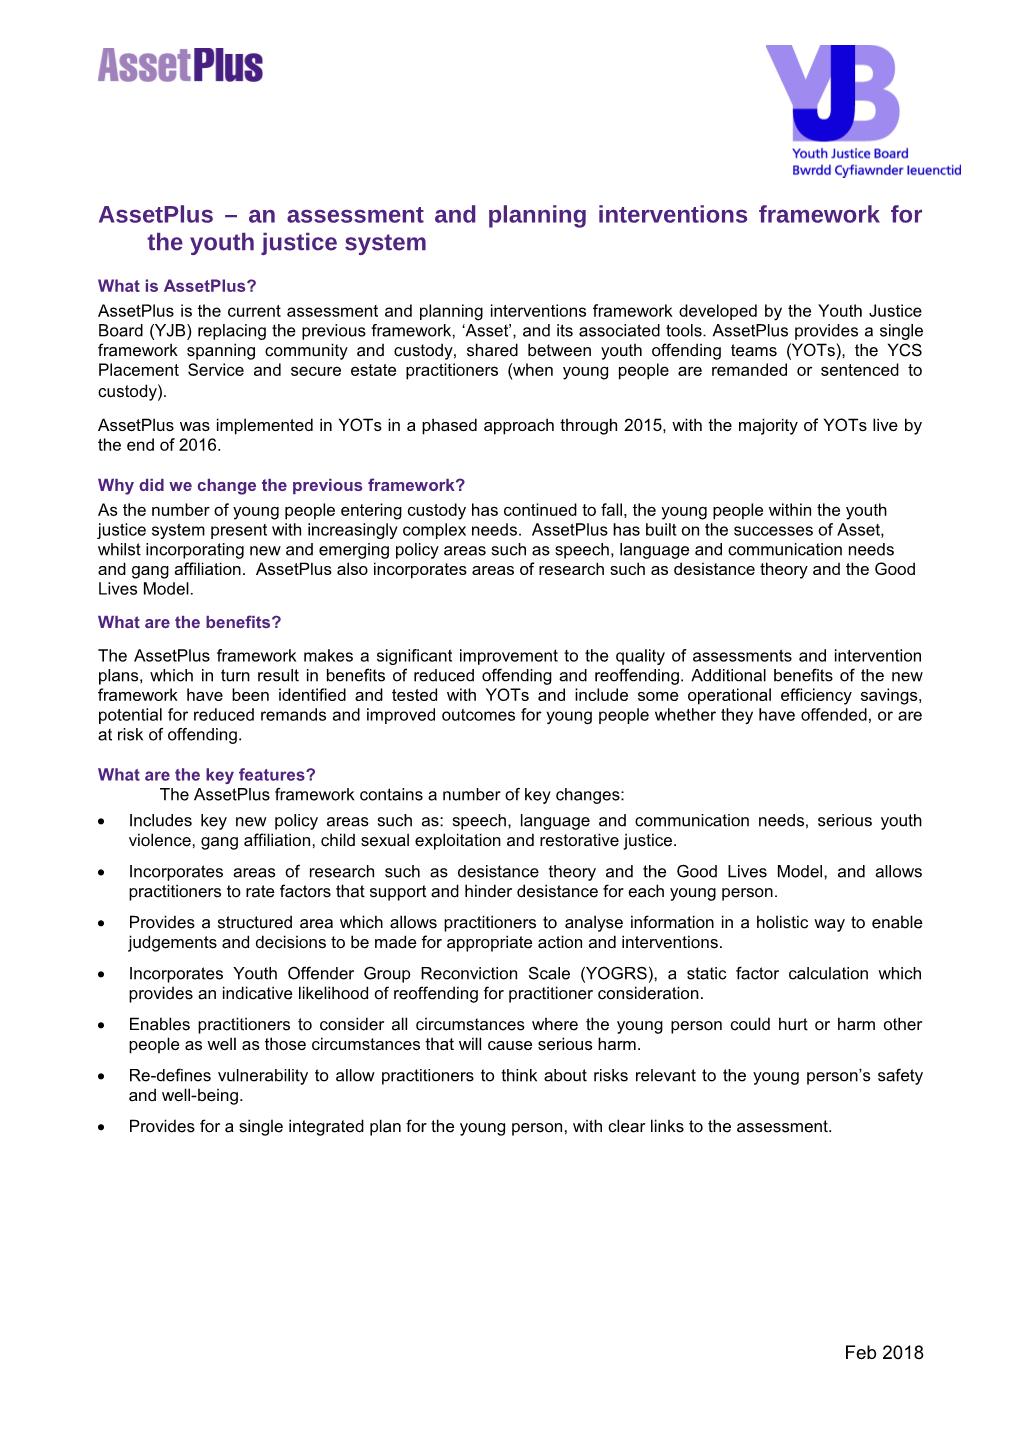 Assetplus an Assessment and Planning Interventions Framework for the Youth Justice System